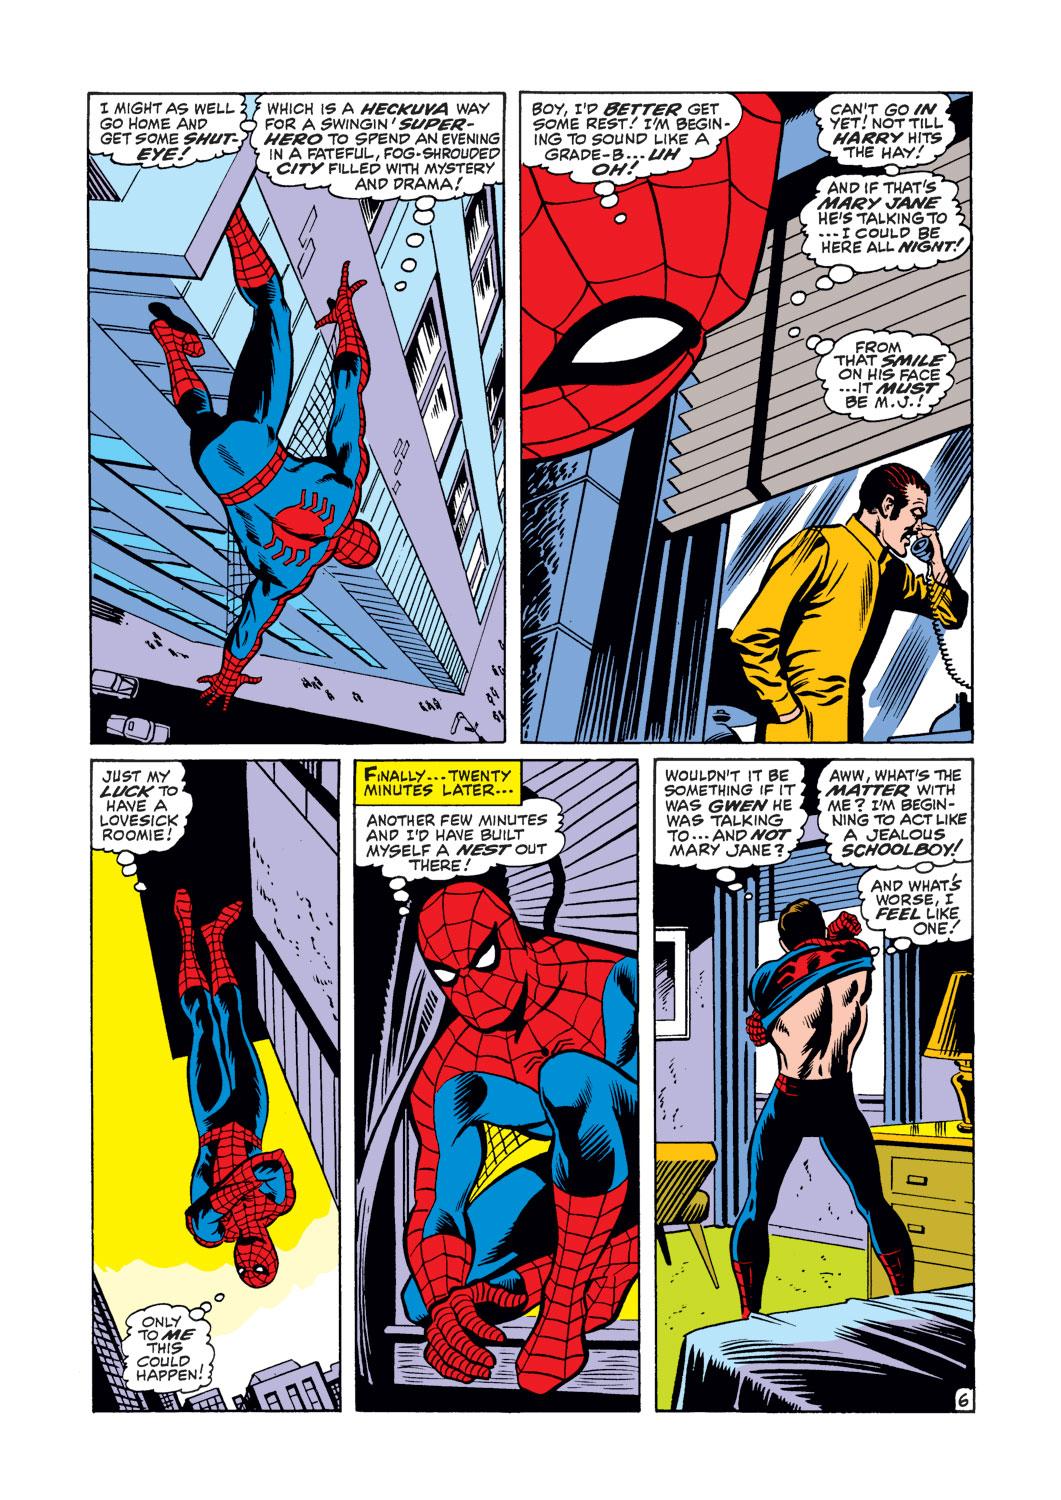 The Amazing Spider-Man (1963) 78 Page 6